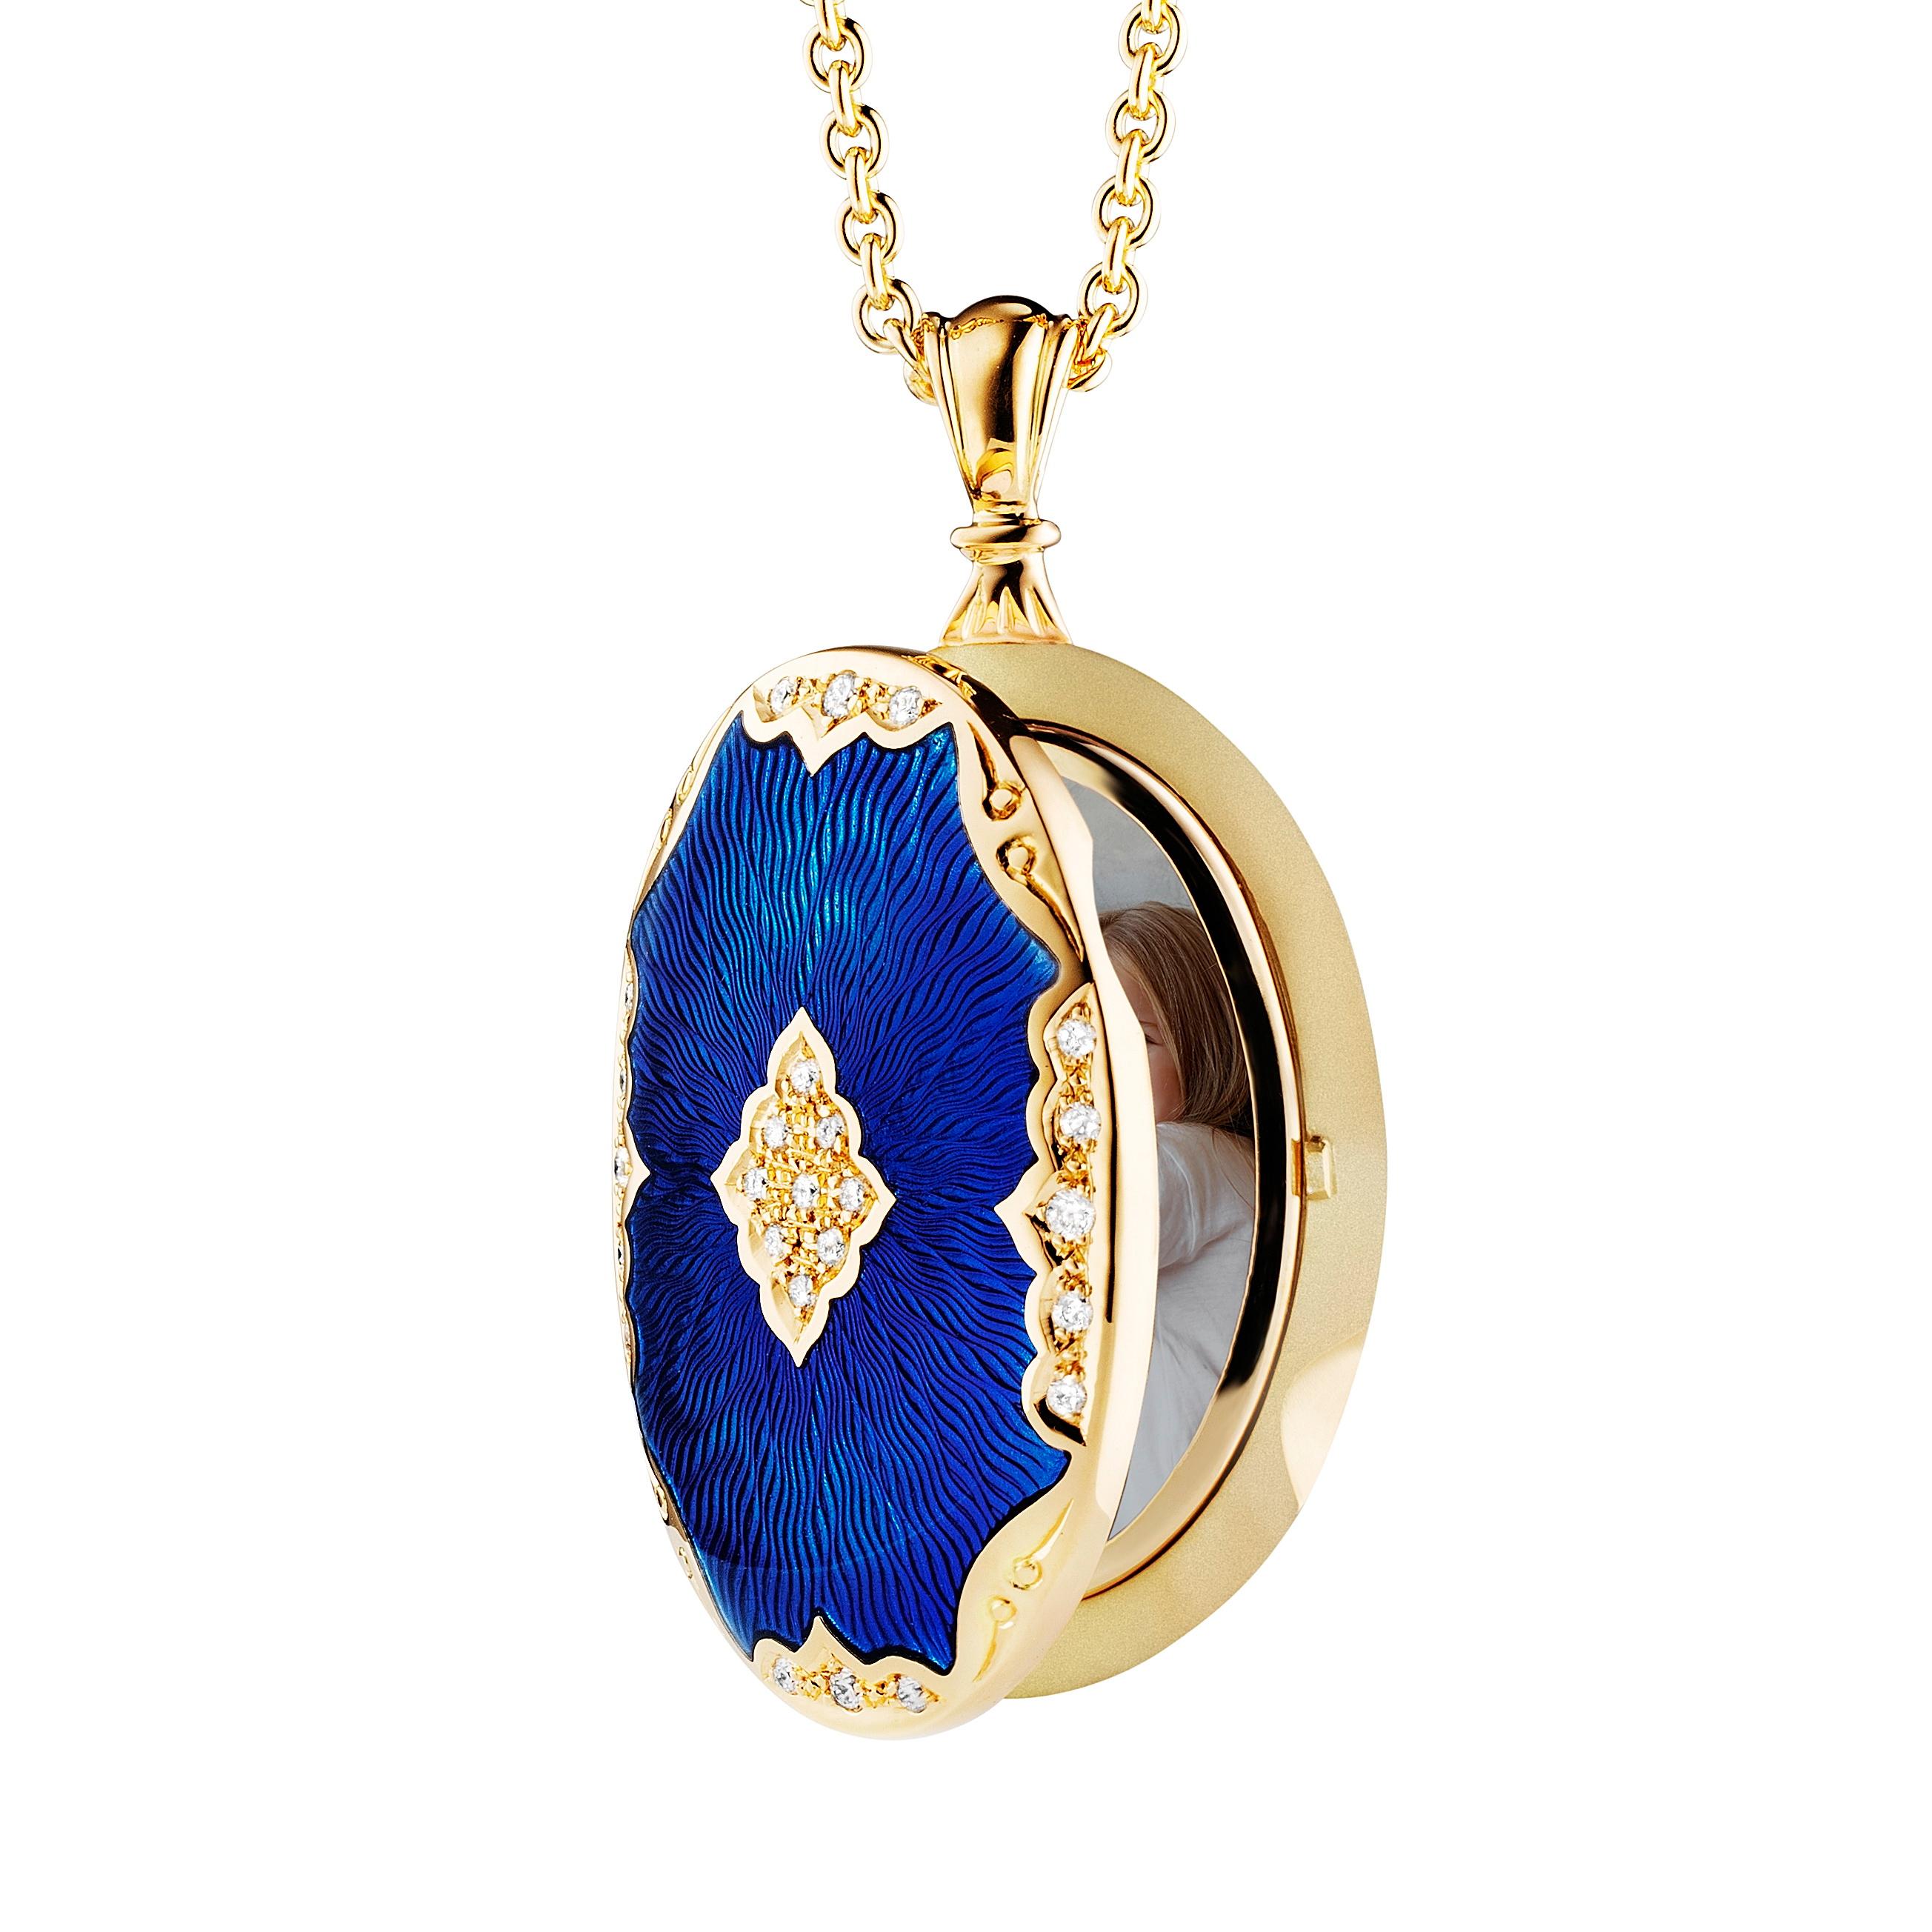 Victor Mayer oval locket pendant neckalce 18k yellow gold, electric blue vitreous enamel, 25 diamonds, total 0.19 ct, measurements app. 25.0 mm x 36.0 mm, chain with four enamel links, 45 cm. 

About the creator Victor Mayer
Victor Mayer is